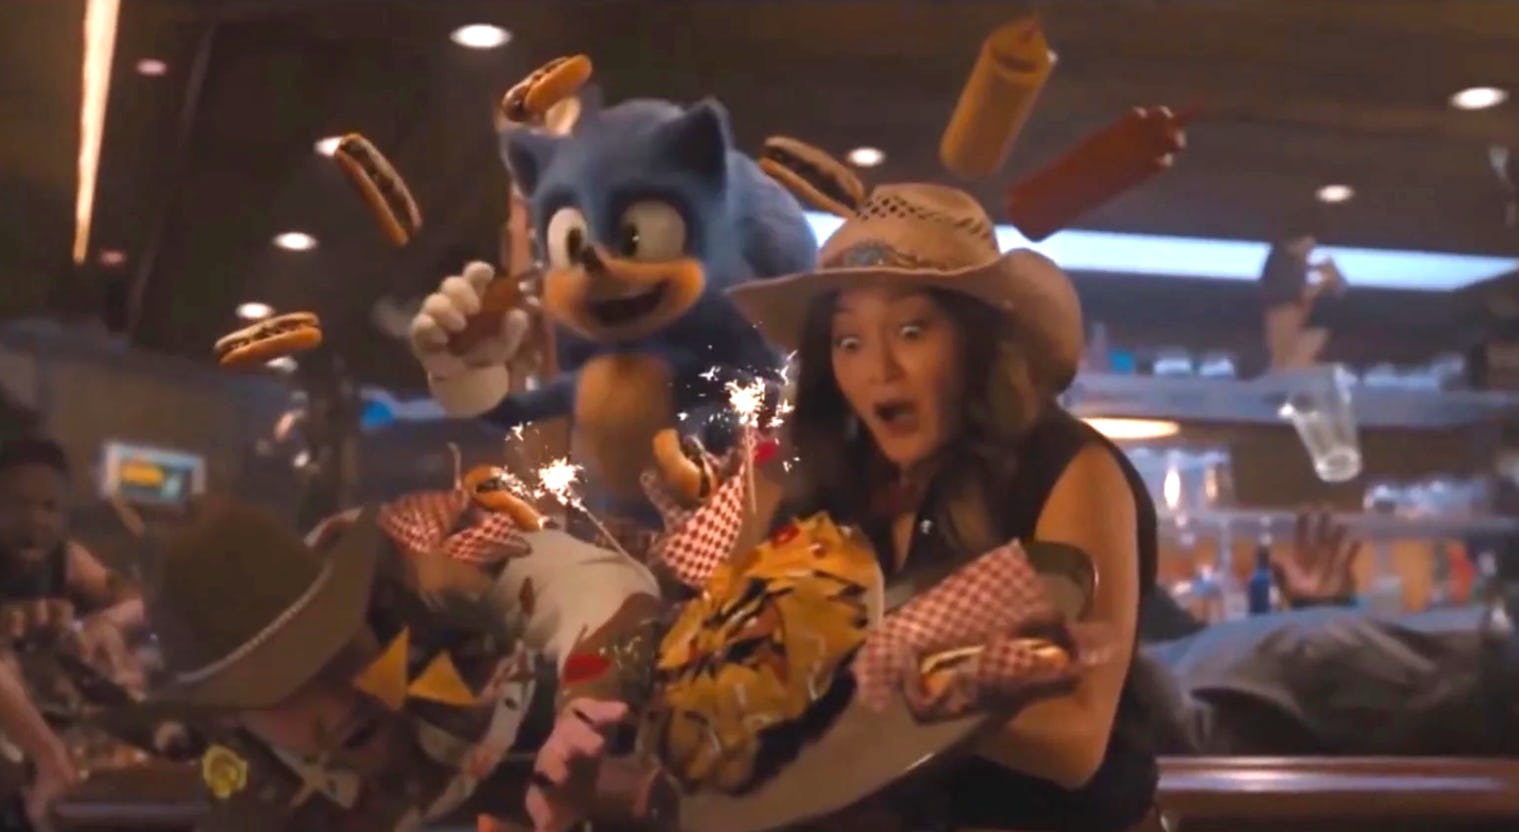 Sonic chili dogs The wild hidden history behind the blue blur's fave snack